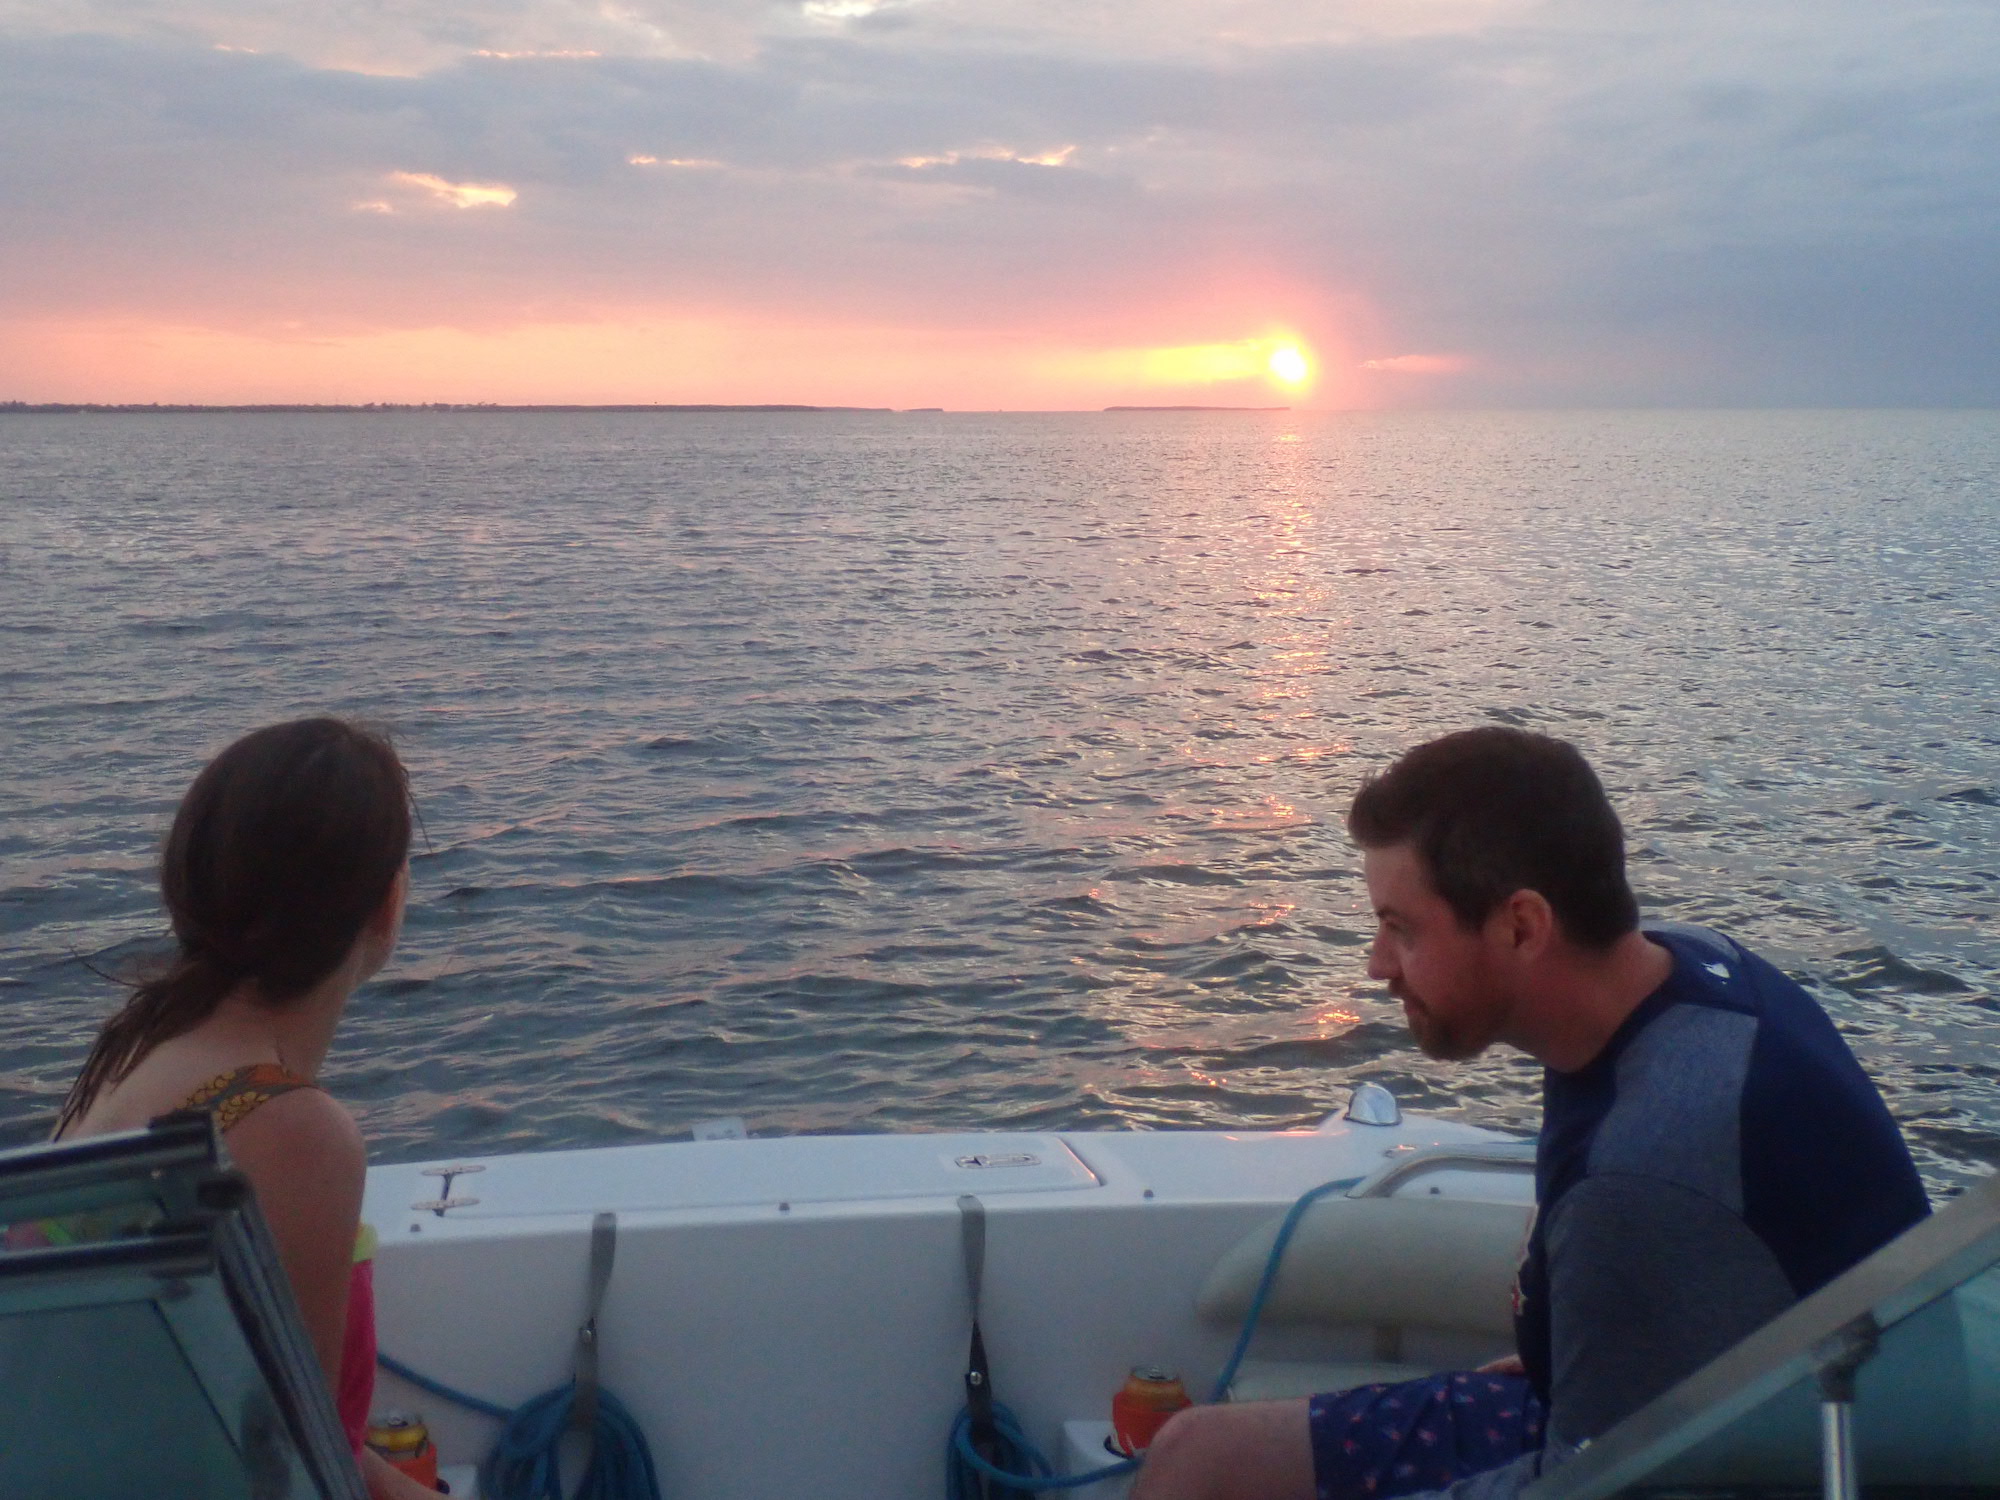 Sunset cruise, two people on the boat watching the sunset